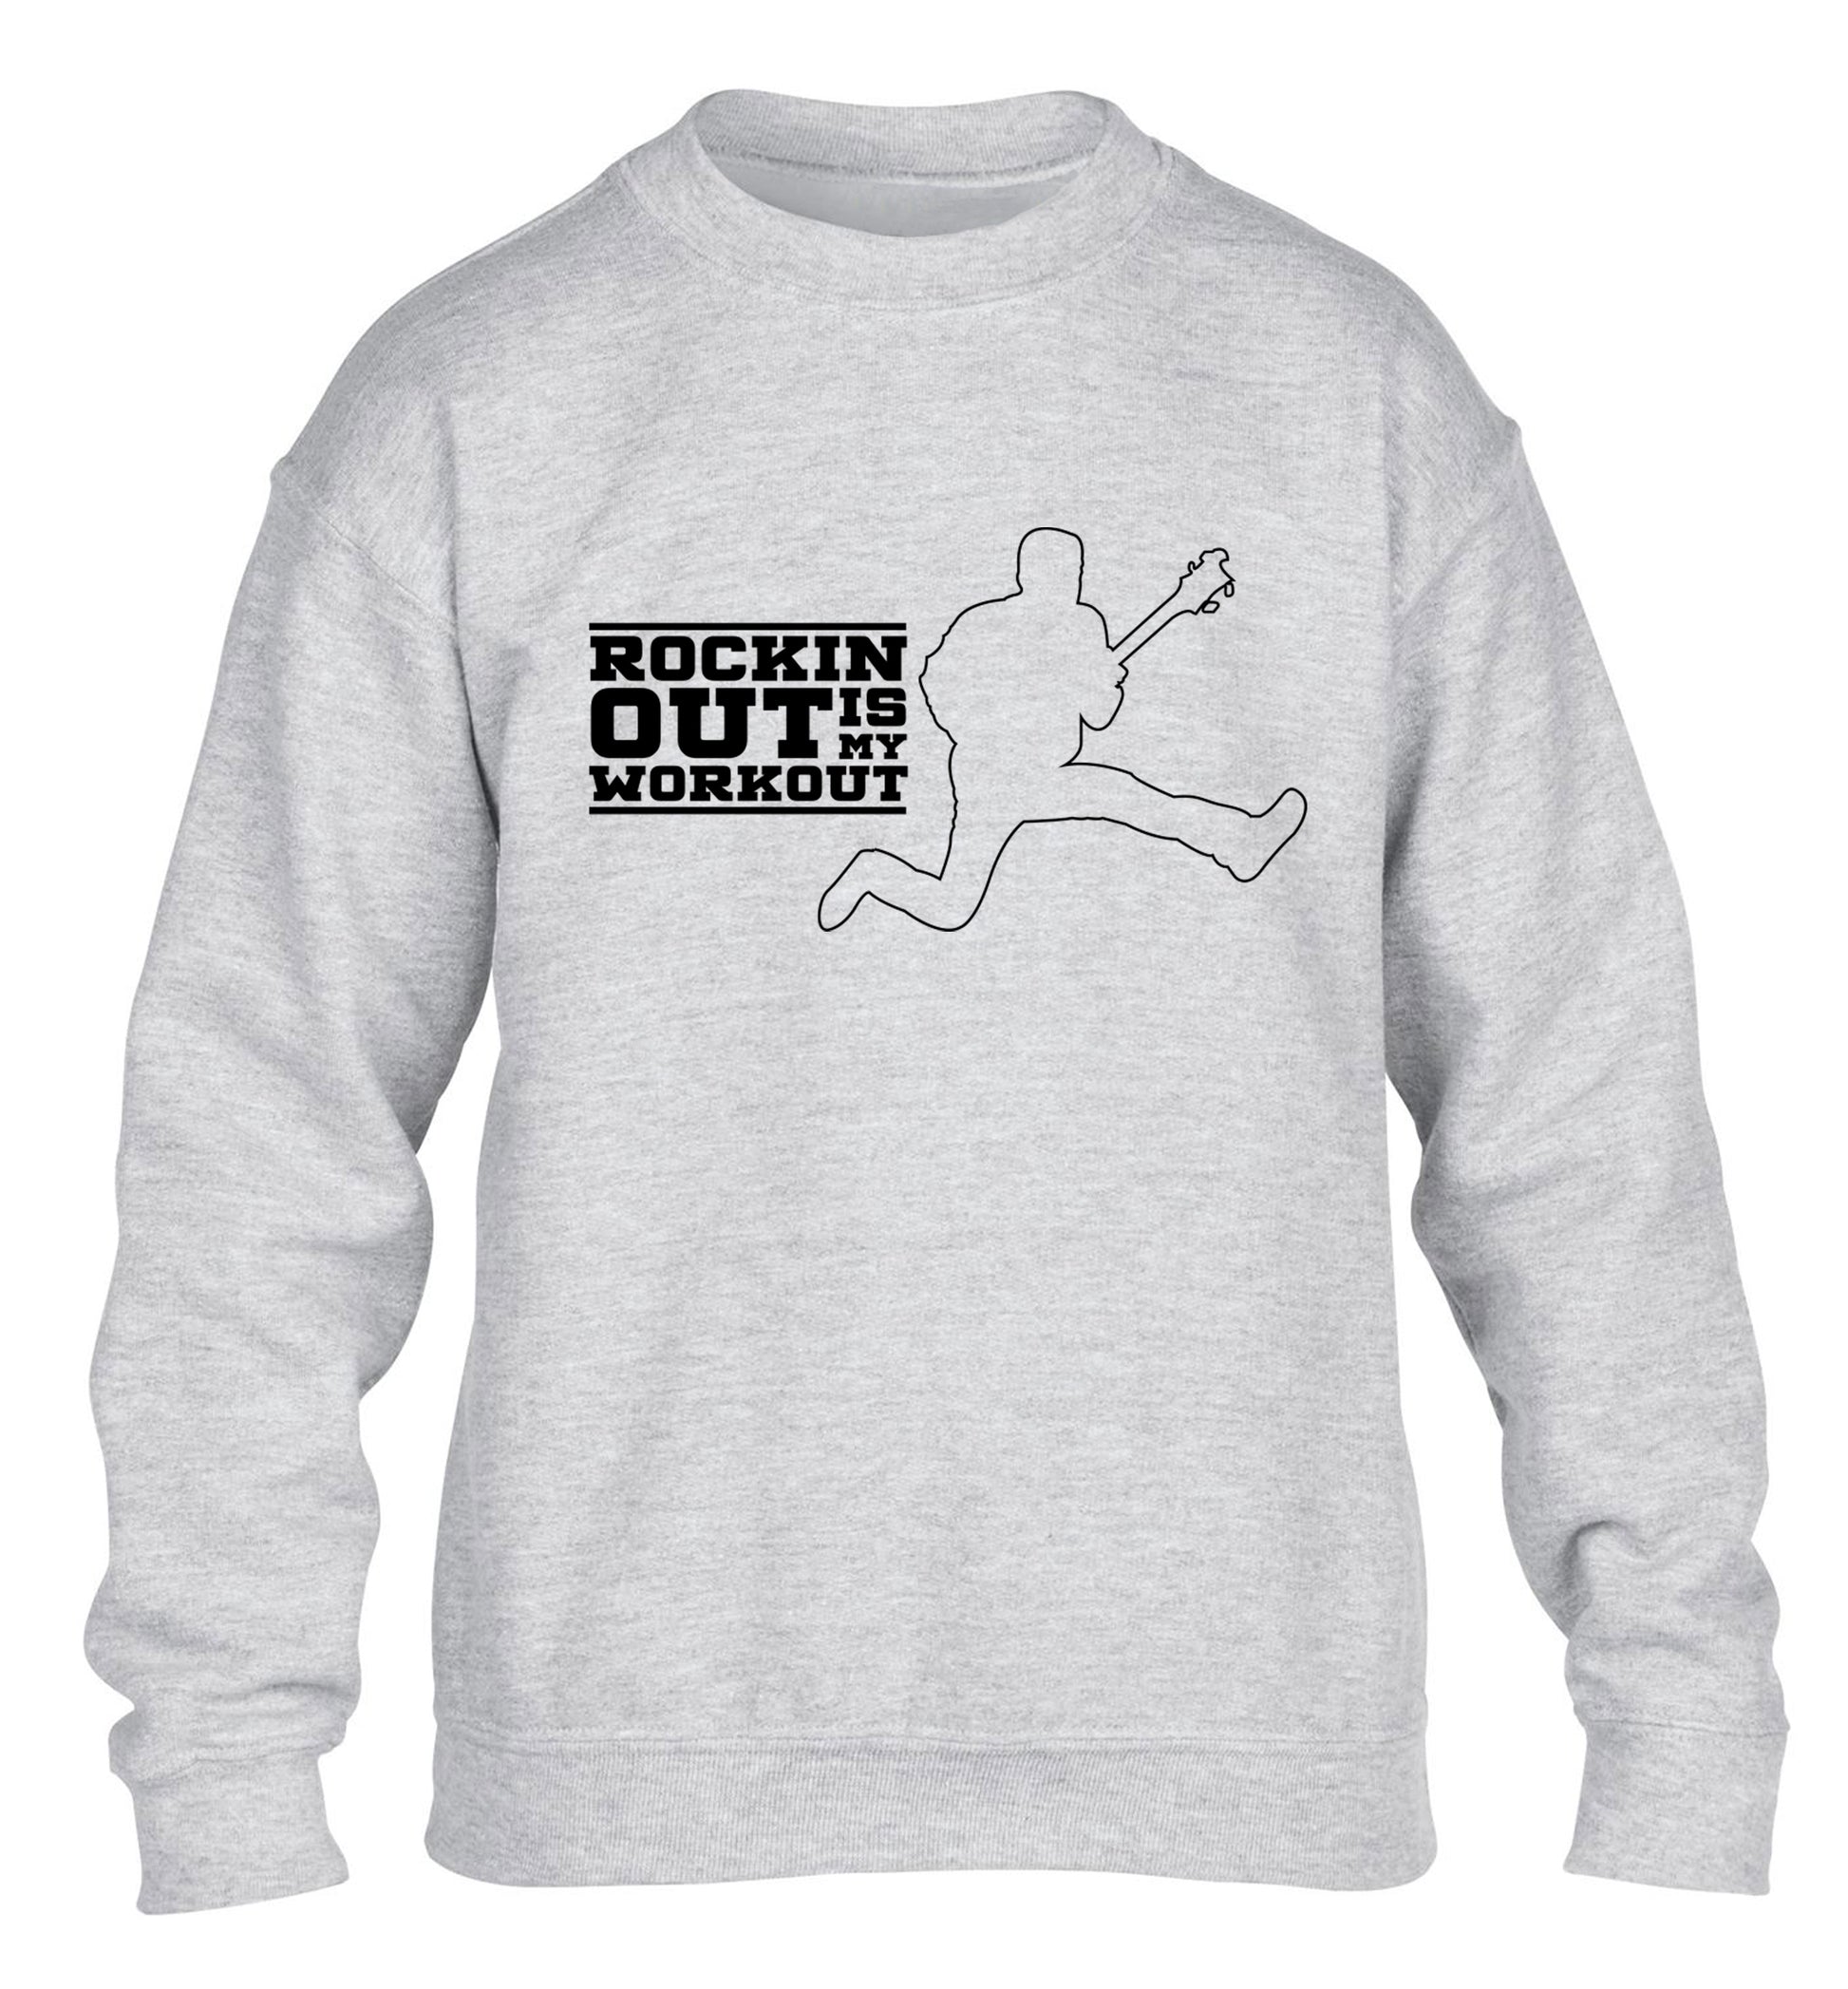 Rockin out is my workout children's grey sweater 12-13 Years